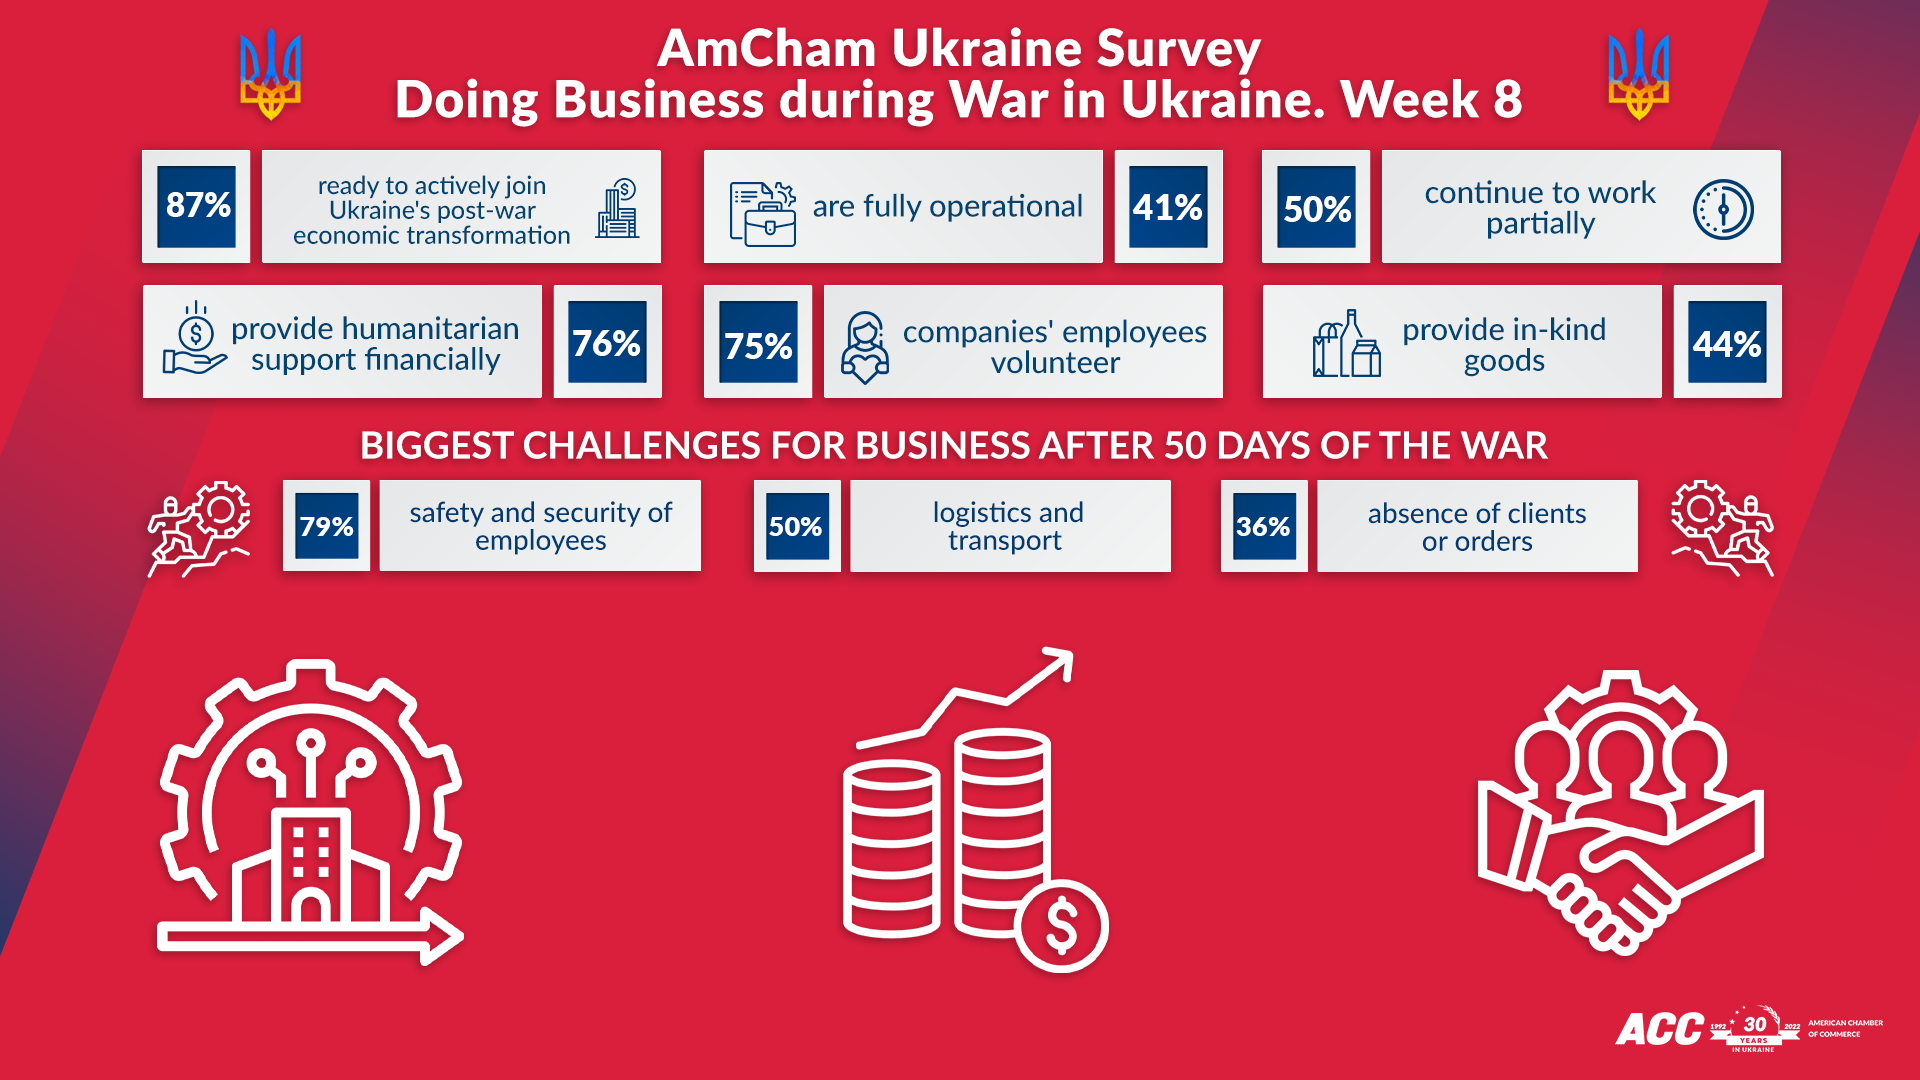 Results of the AmCham Survey on Doing Business during War in Ukraine. Week 8